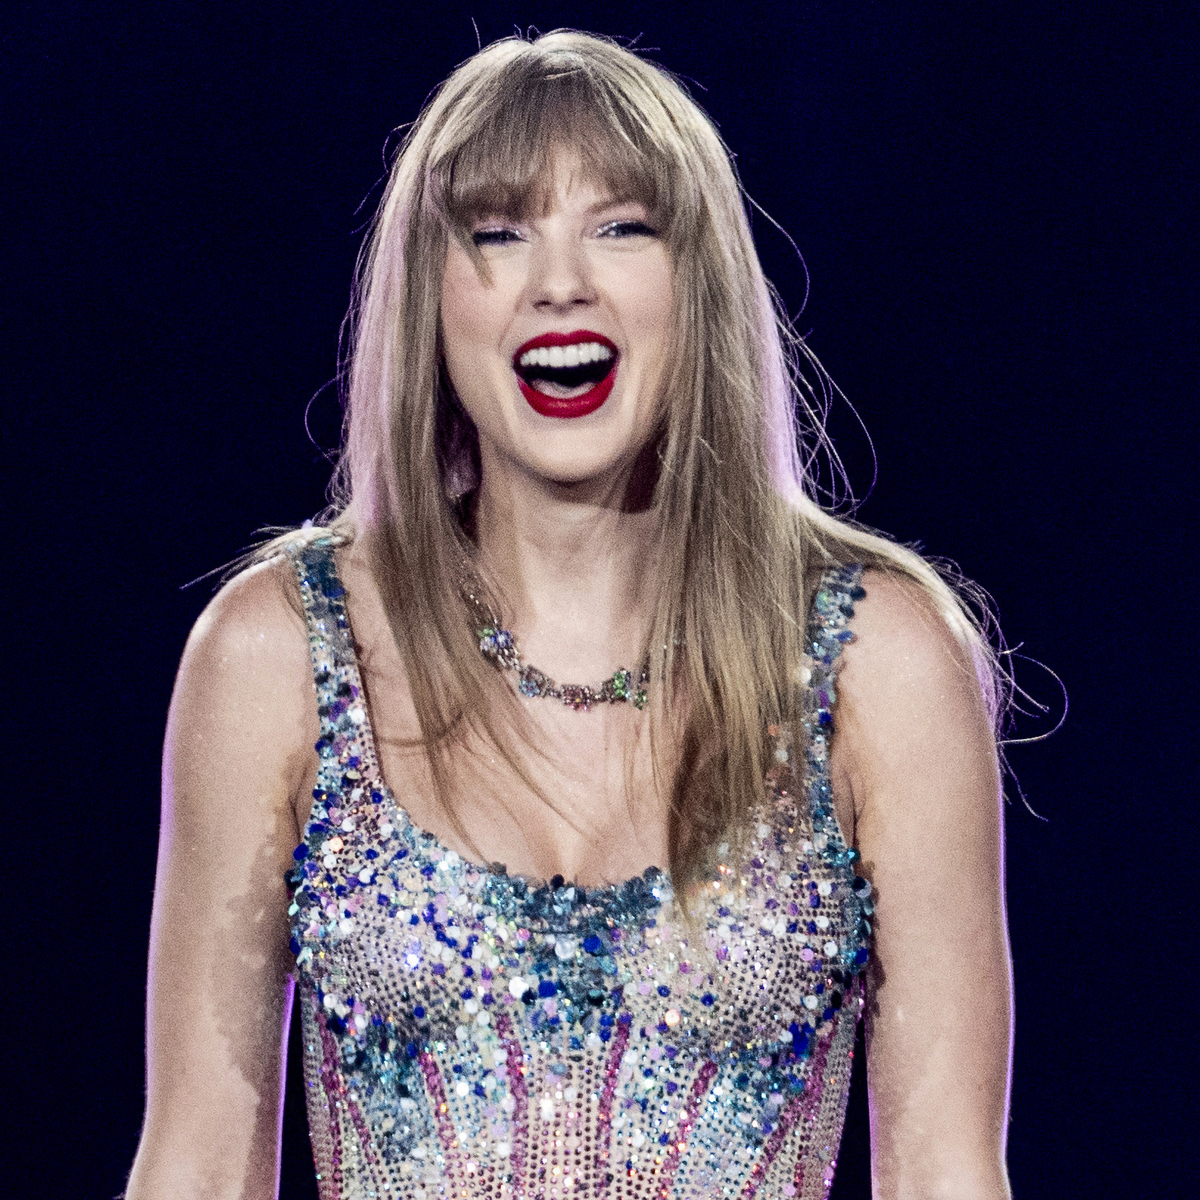 Taylor Swift’s Whole Dress Comes Off in…